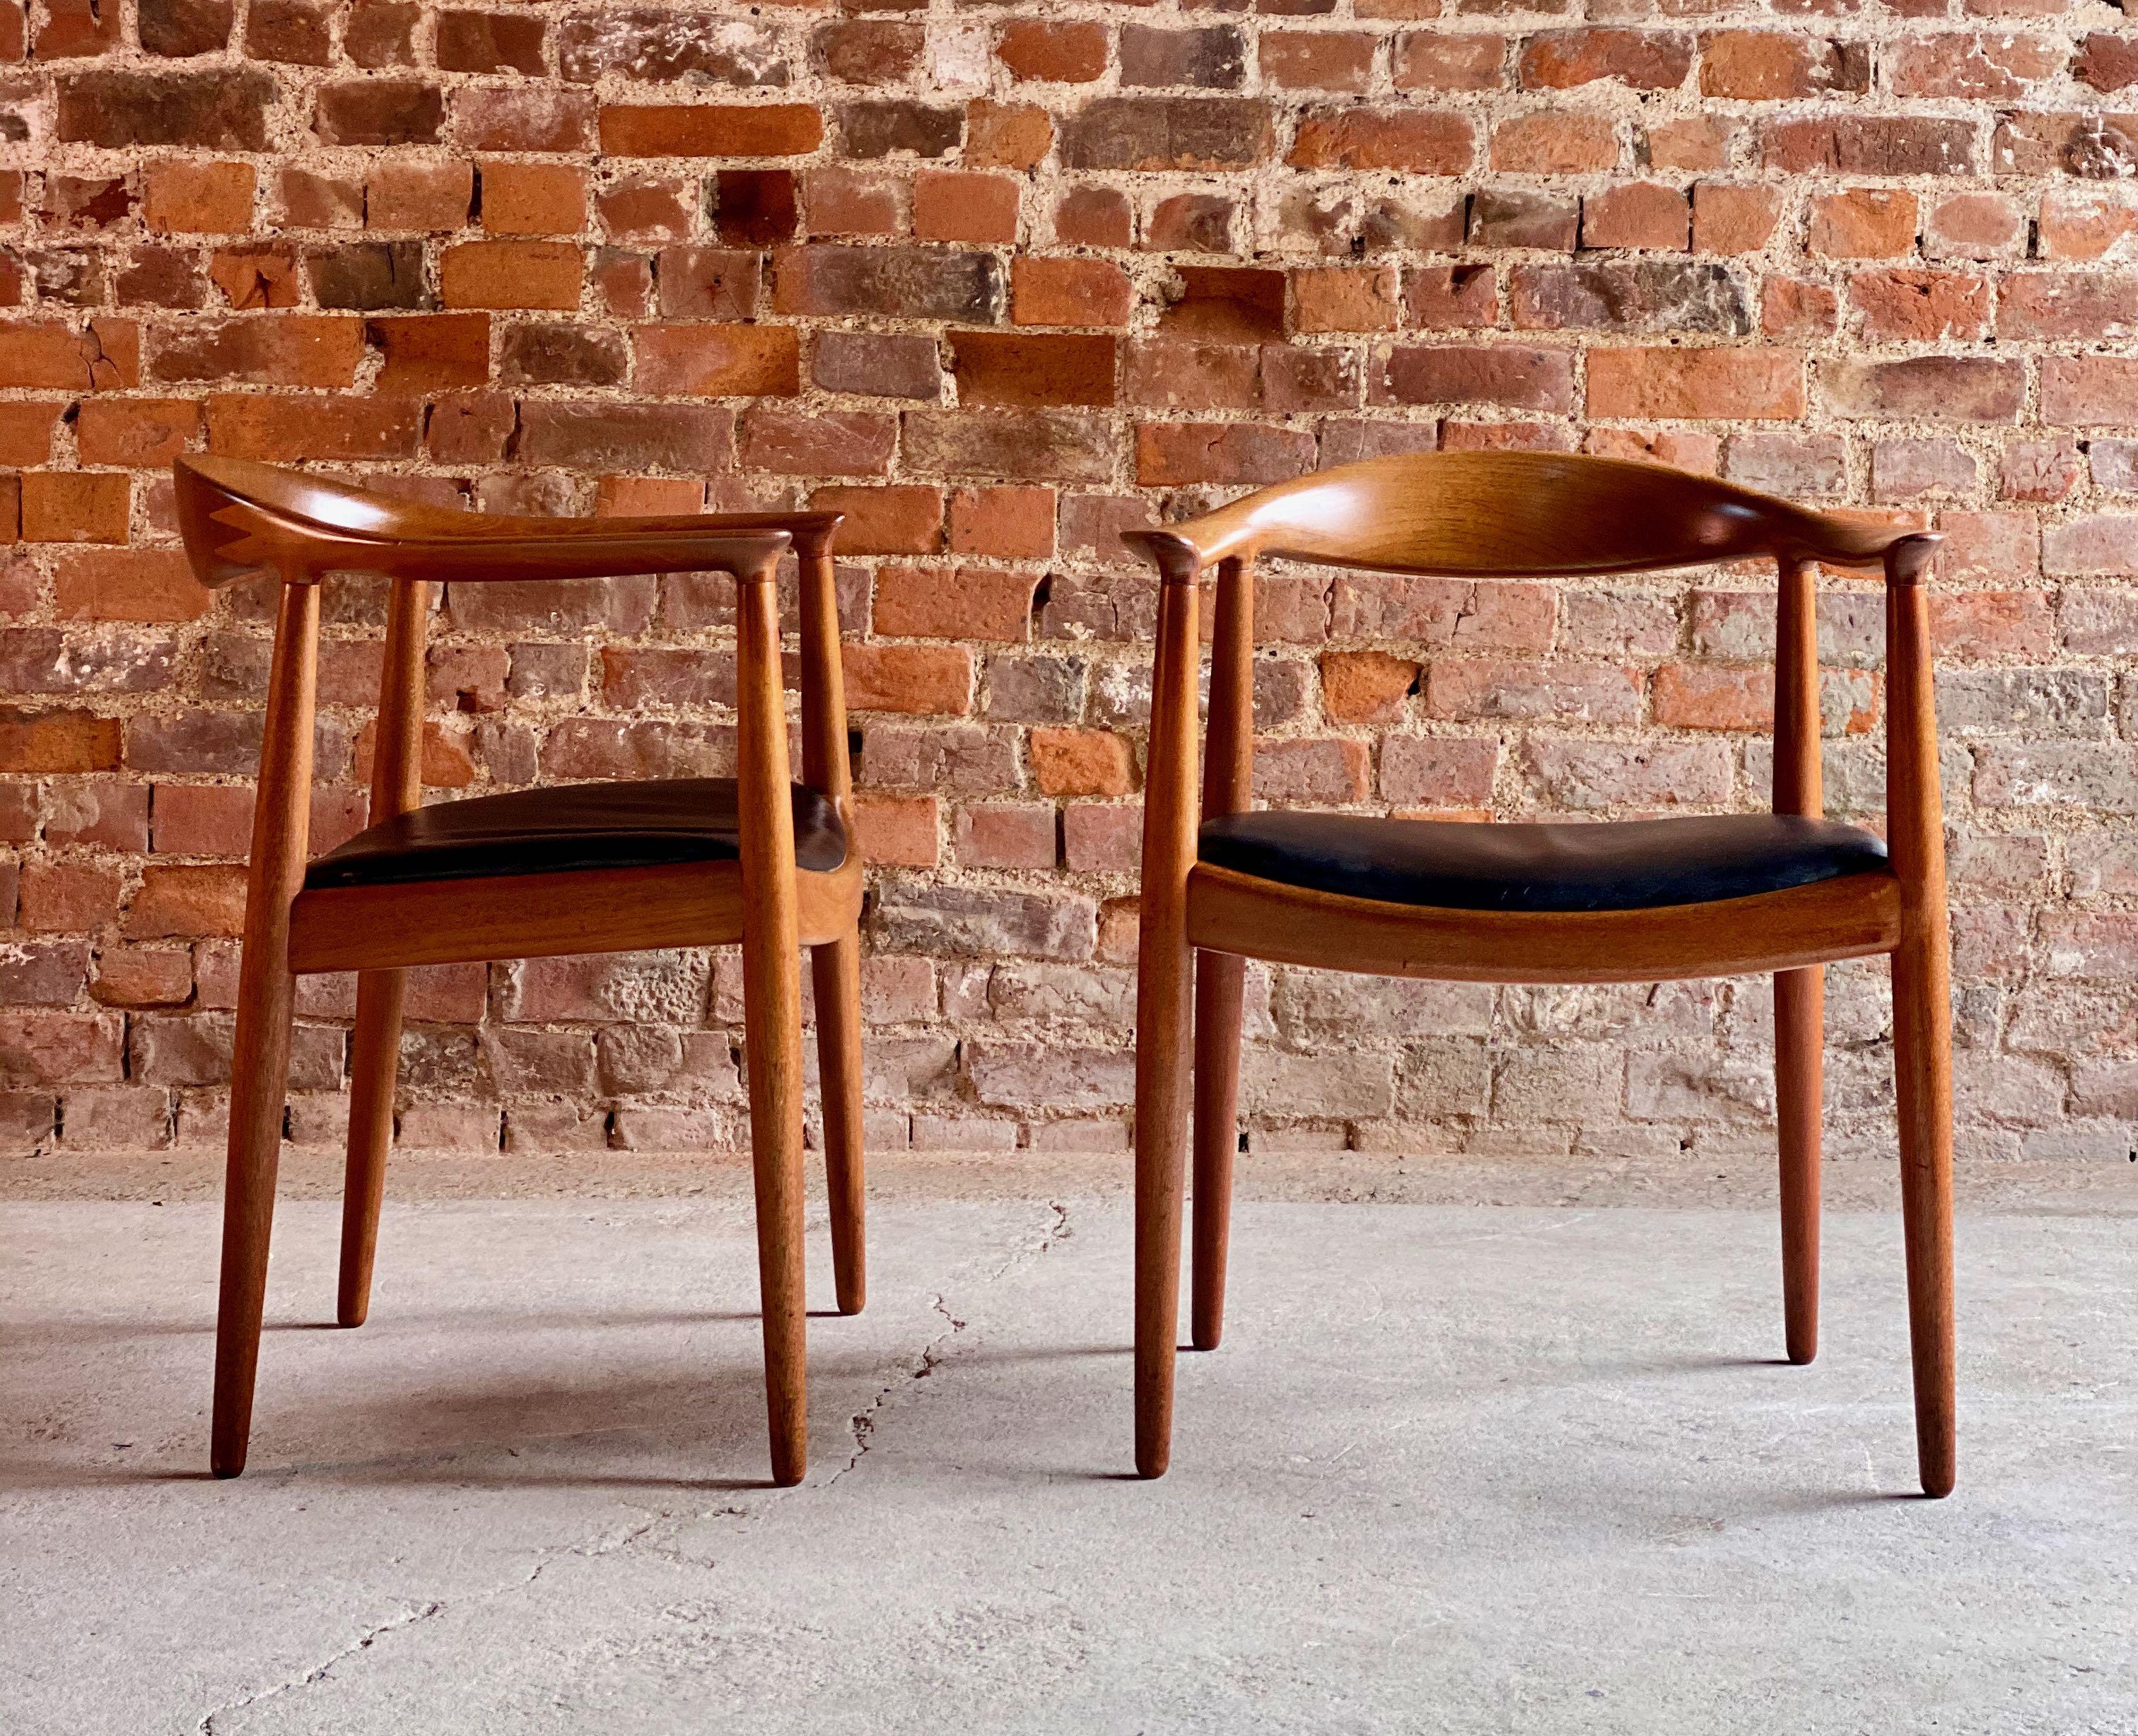 Hans J. Wegner ‘The Chair’ model JH503 by Johannes Hansen Dambusters Interest, circa 1954

We are delighted to offer a magnificent rare pair of Hans J. Wegner ‘The Chair’ model JH503 in teak by Johannes Hansen Denmark circa 1954, the chairs